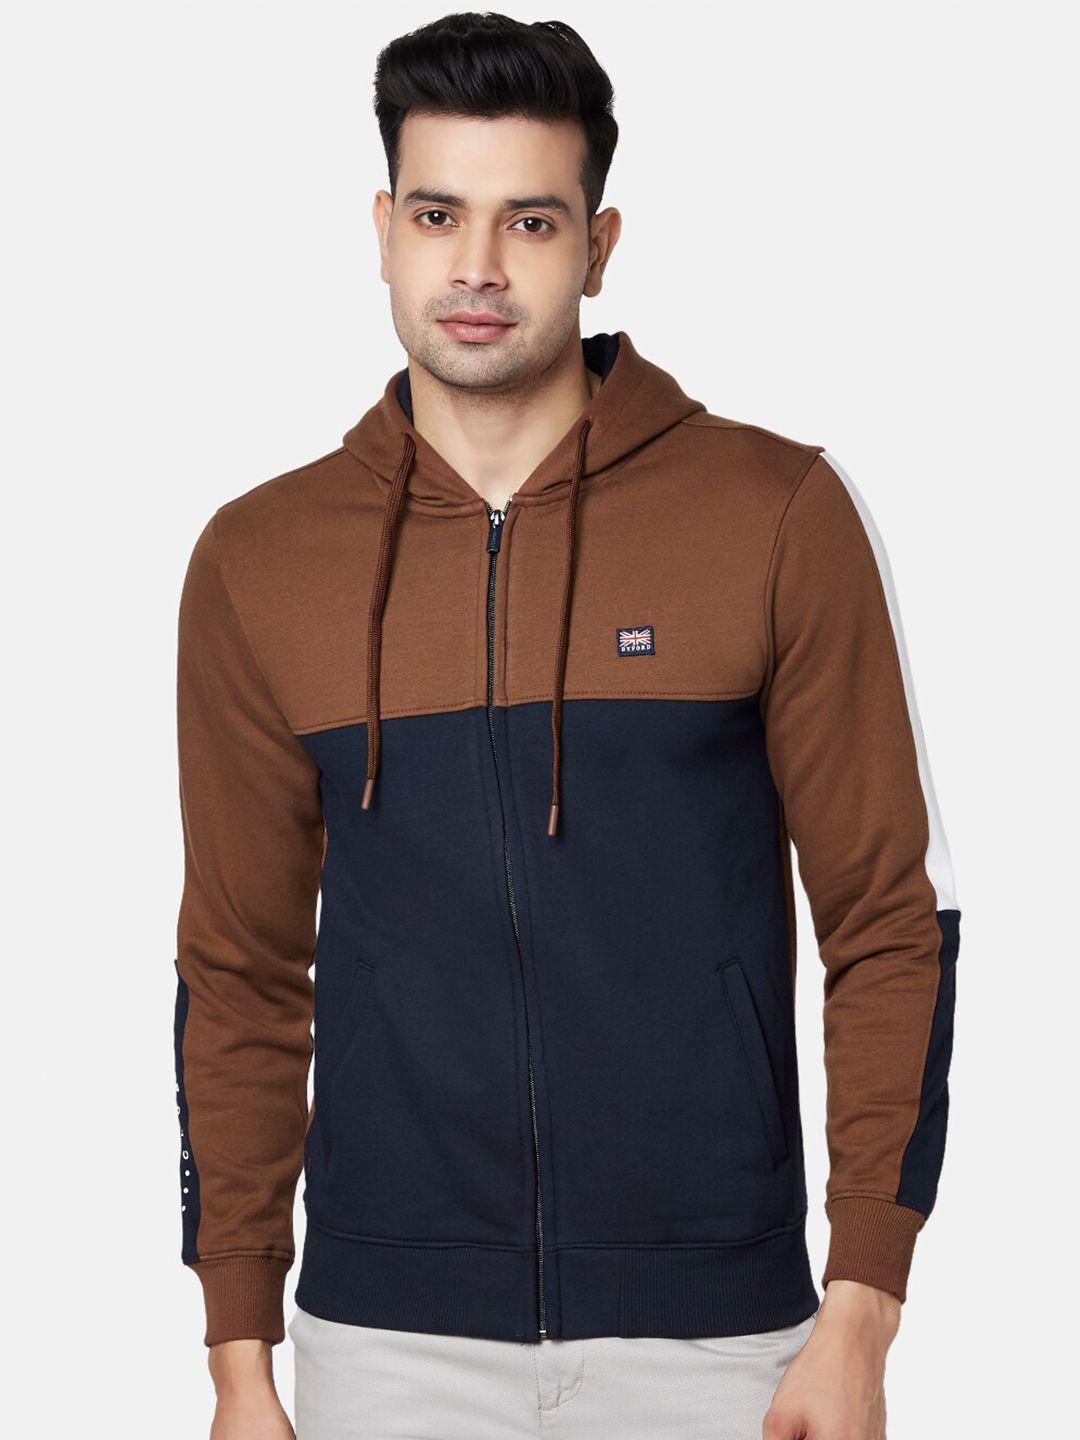 byford by pantaloons men brown & navy blue colourblocked cotton hooded sweatshirt